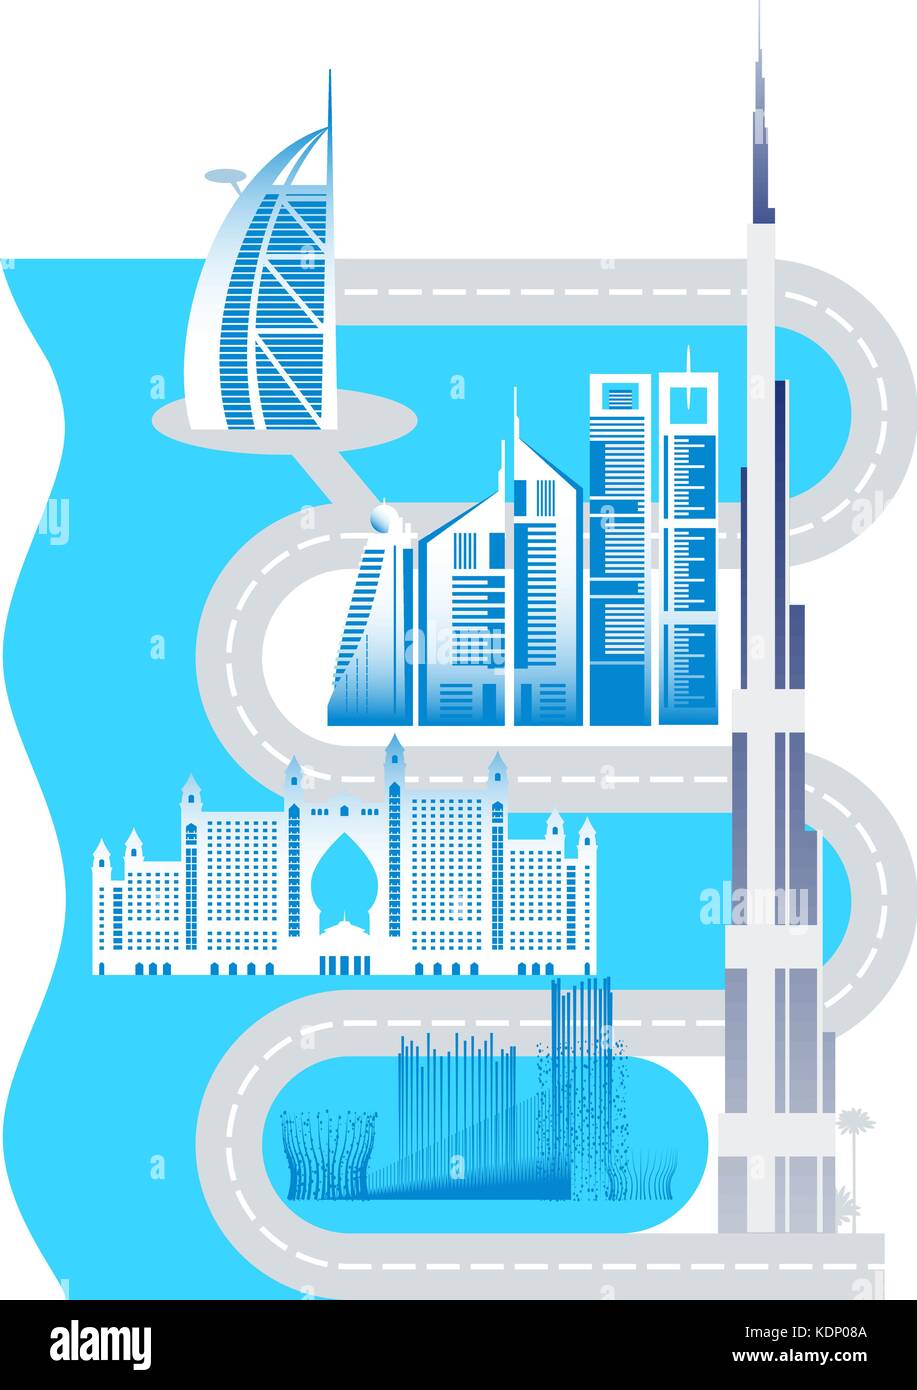 Dubai cityscape with skyscrapers and landmarks vector illustration Stock Vector